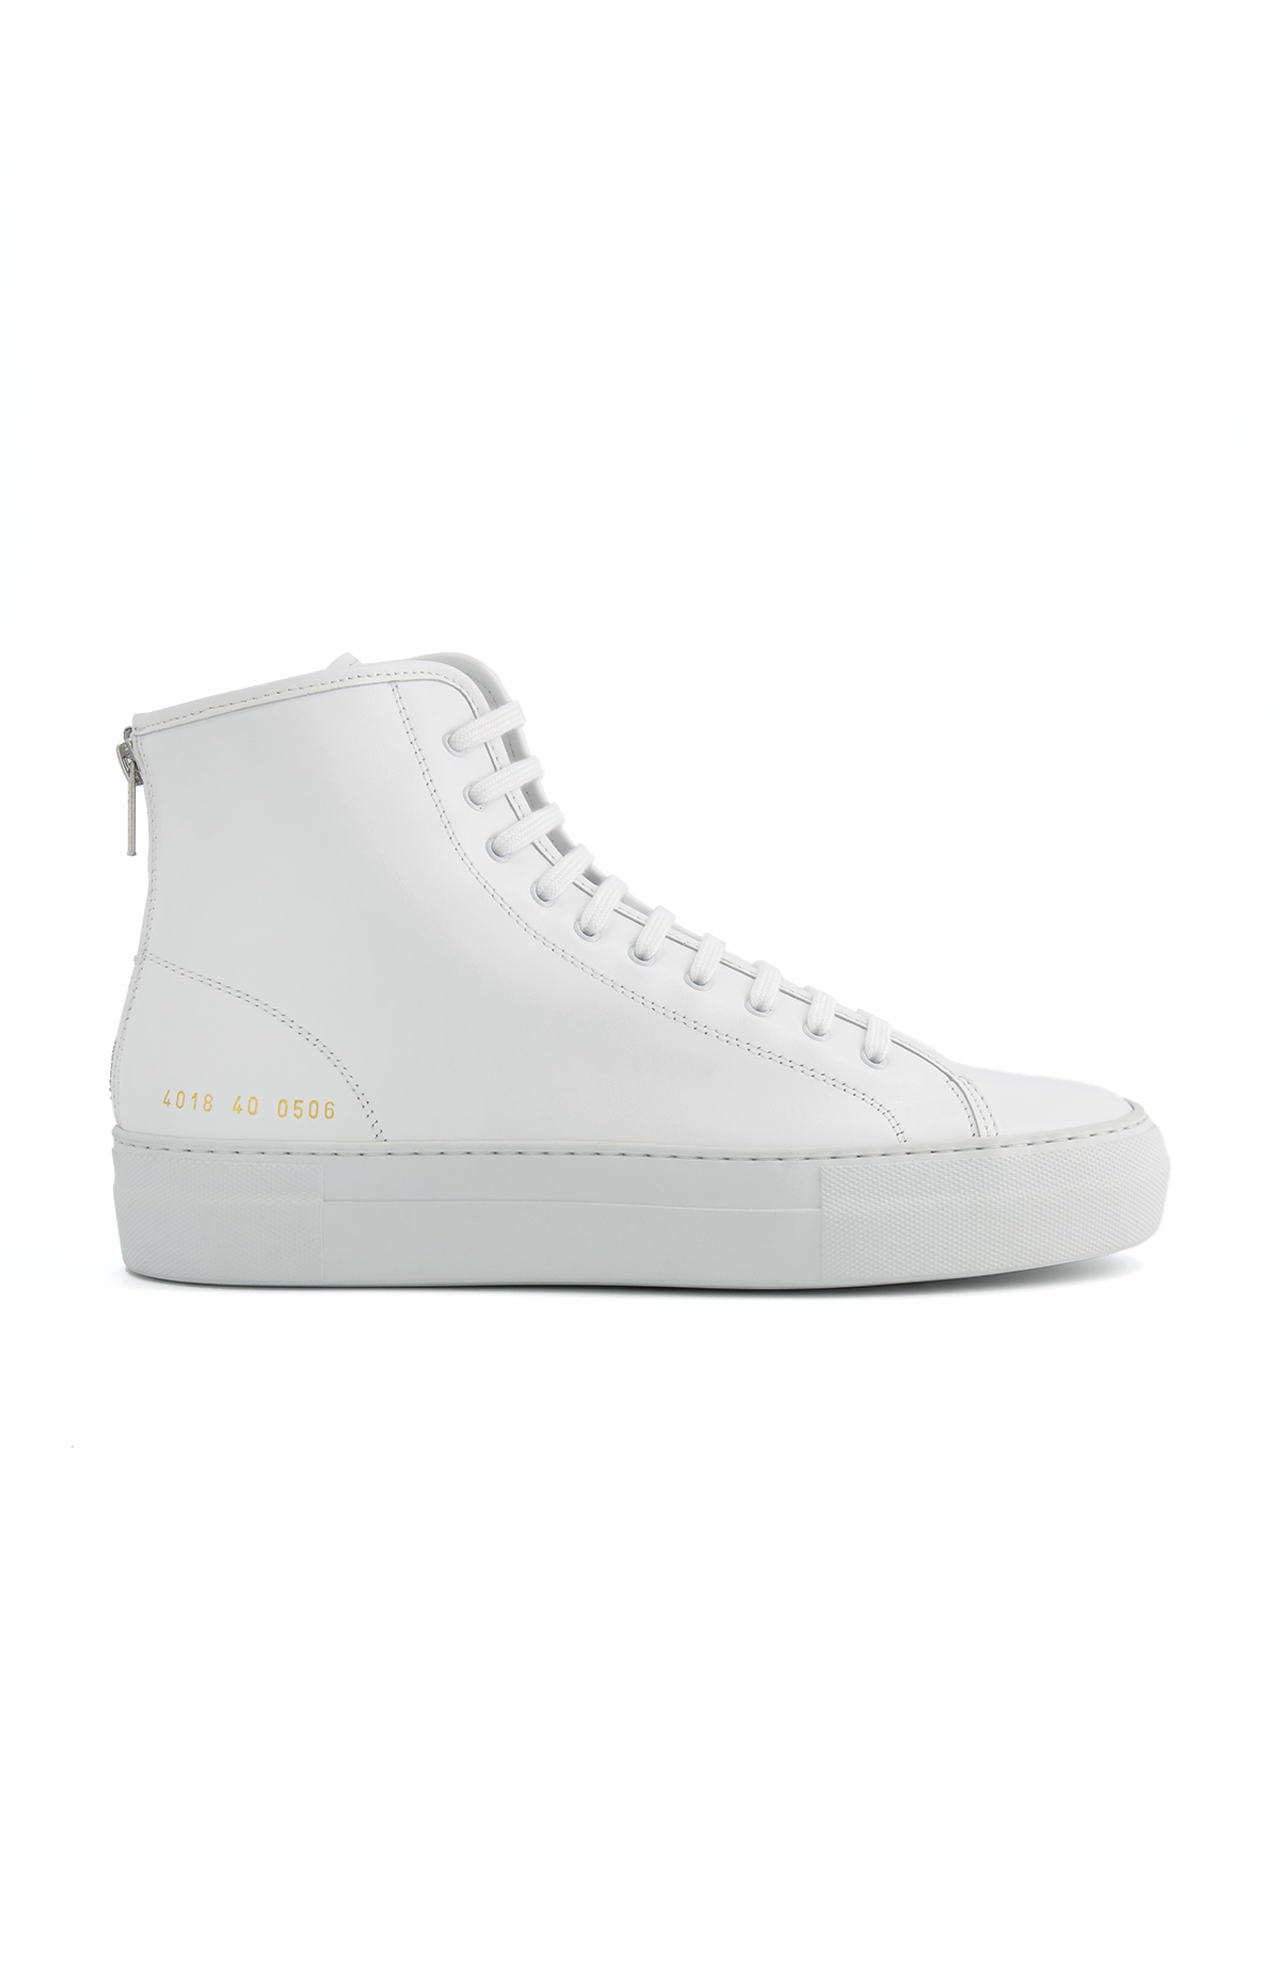 COMMON PROJECTS - Tournament Low Leather Sneakers